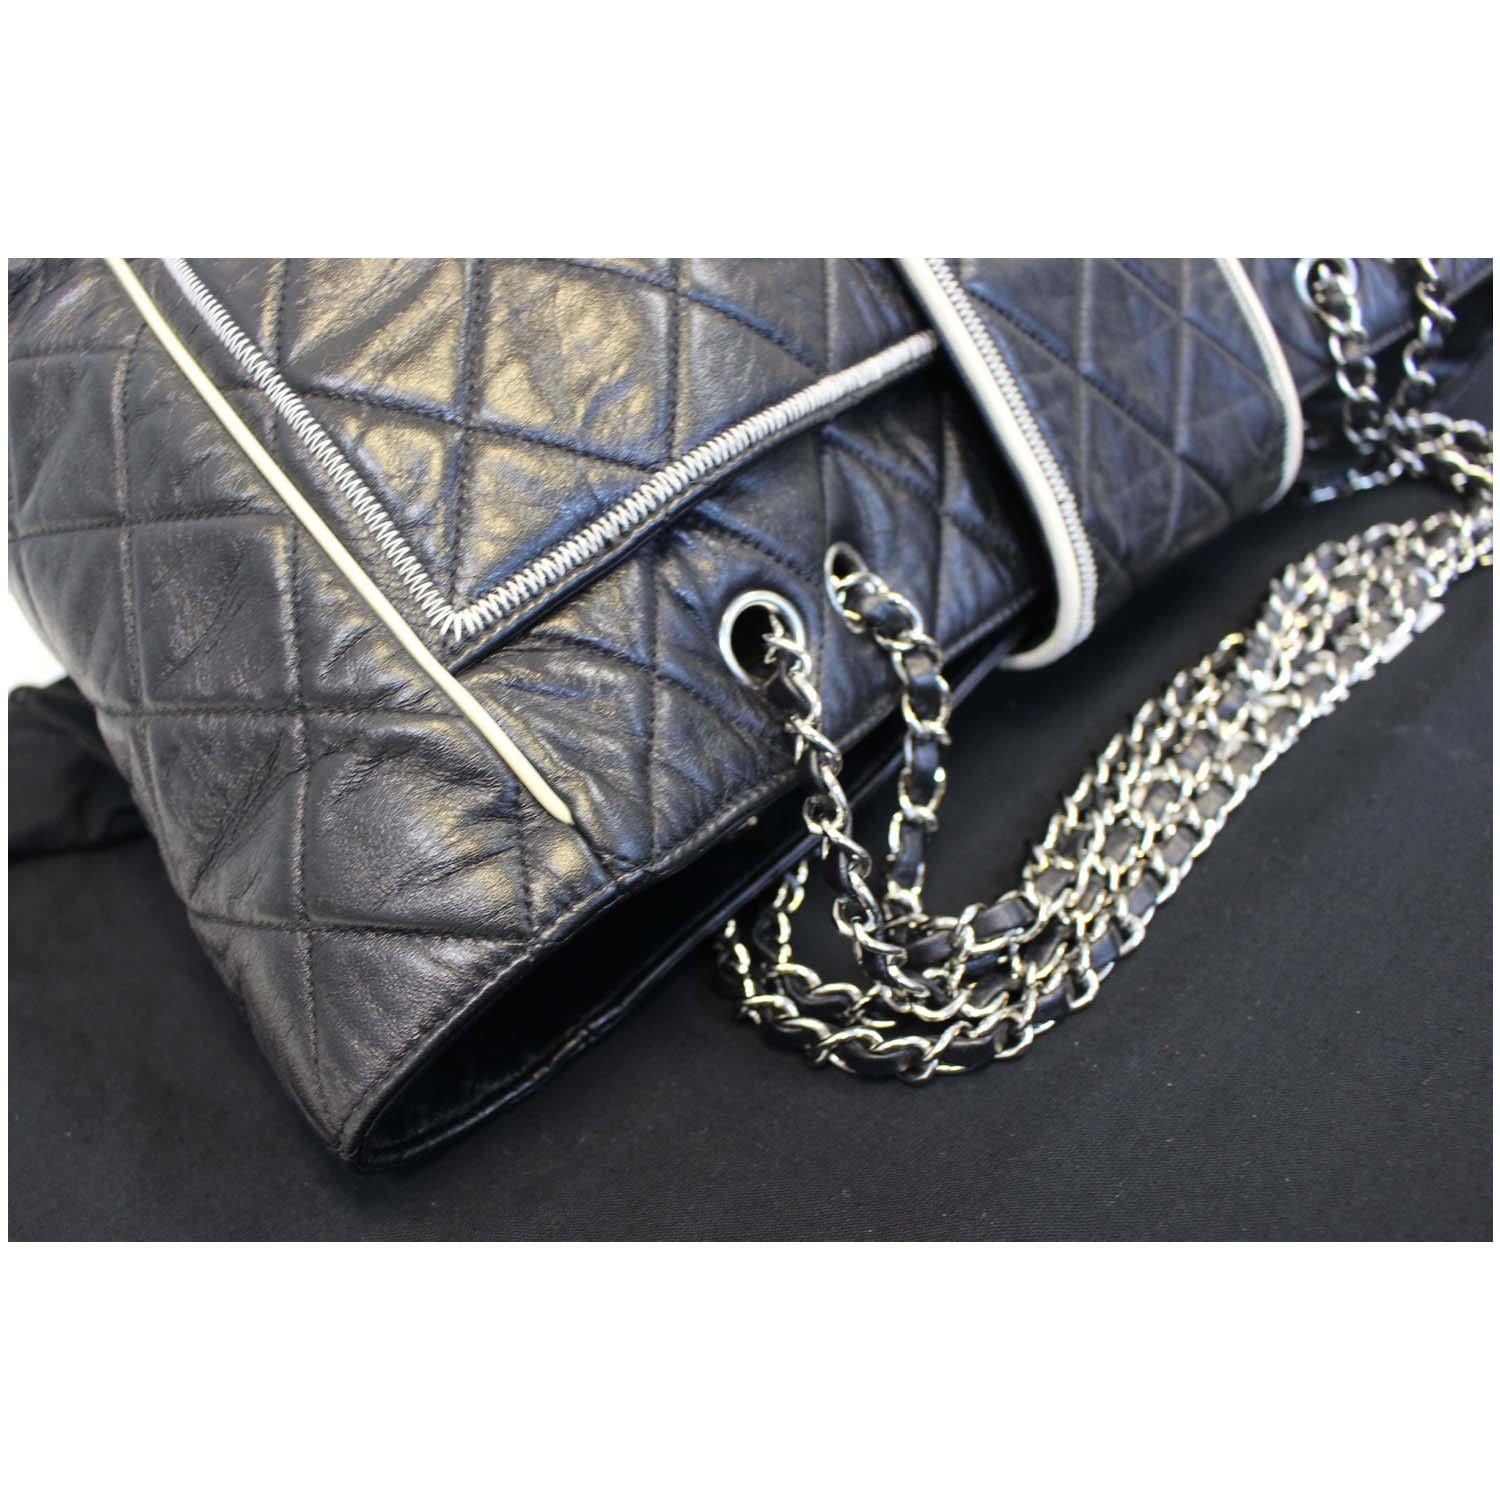 Fake vs. Real Chanel Bag: How to Spot an Imposter - Paisley & Sparrow